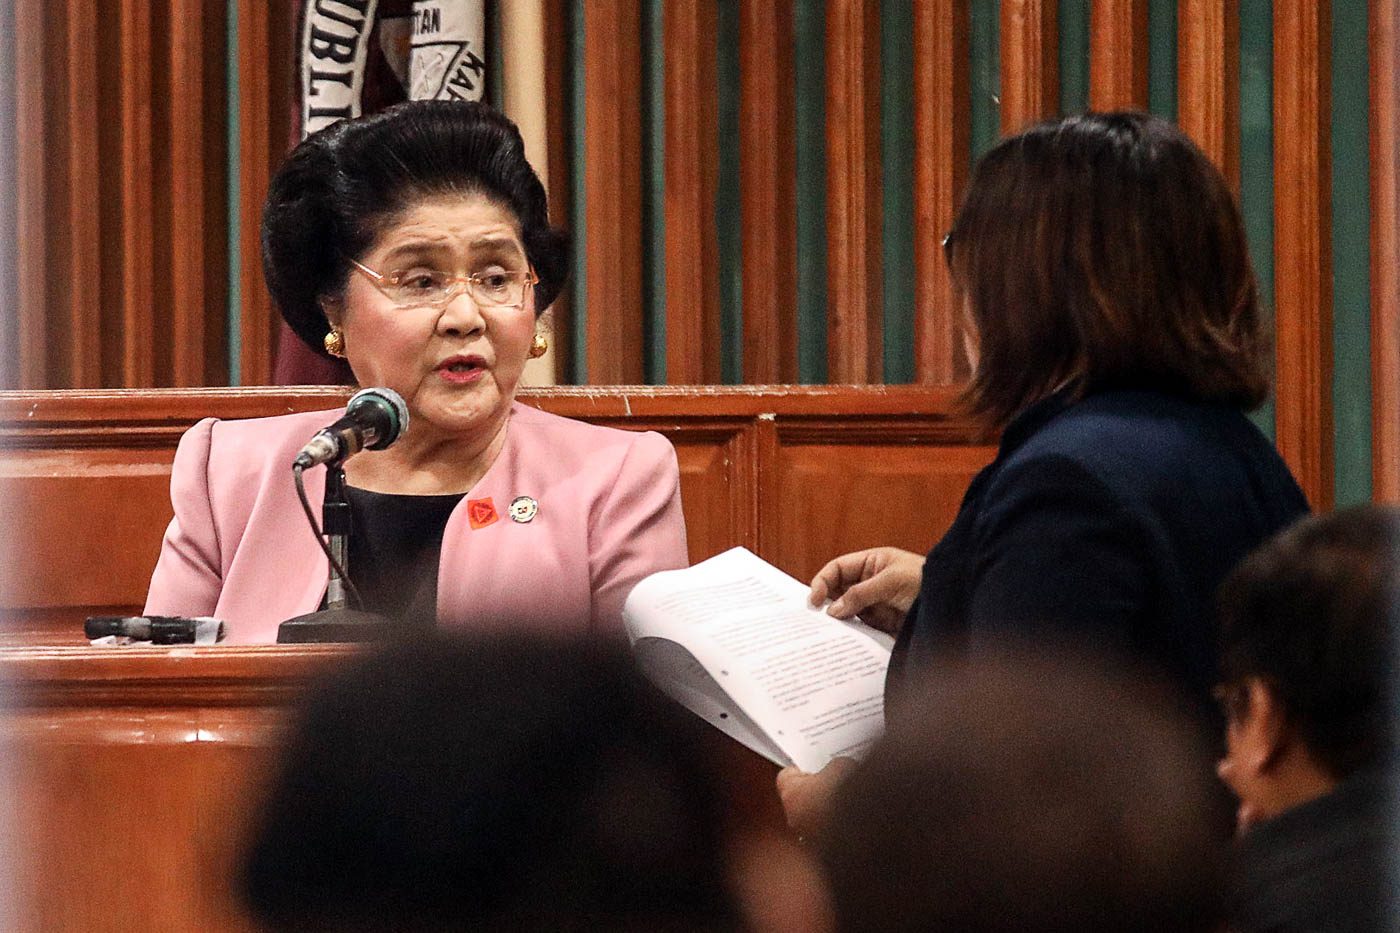 Imelda Marcos wants to appeal conviction straight to Supreme Court